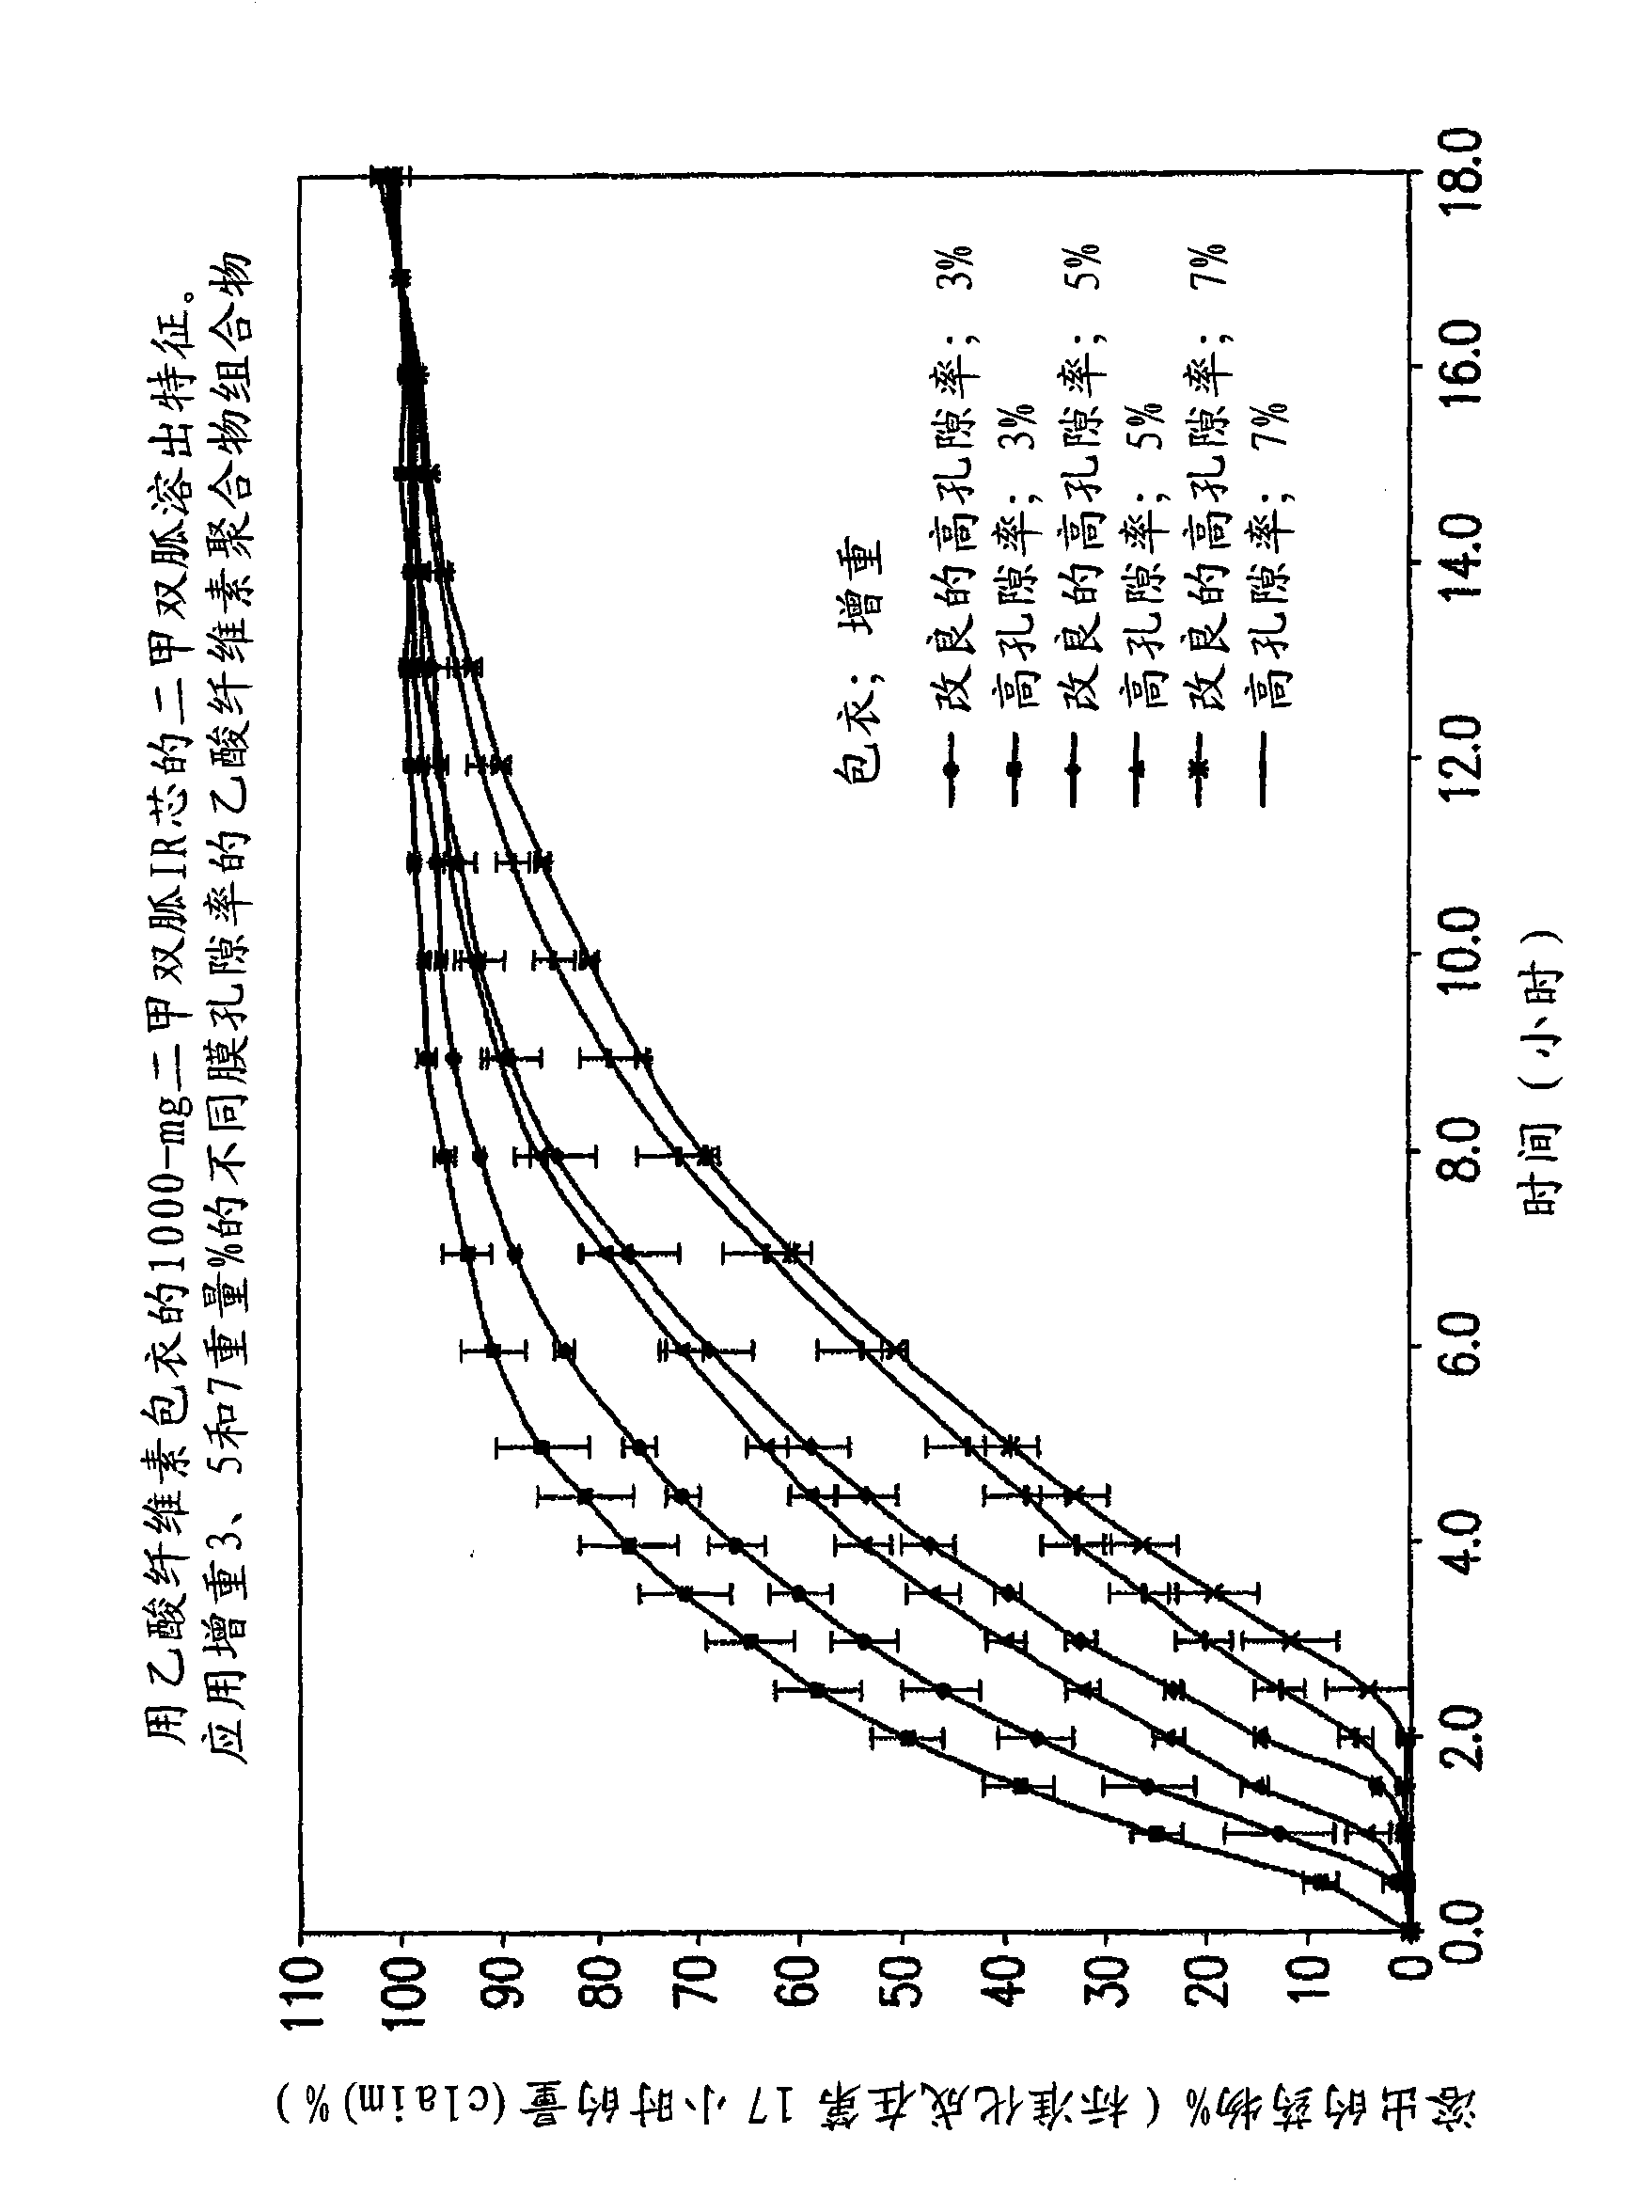 Pharmaceutical compositions of a combination of metformin and a dipeptidyl peptidase-IV inhibitor